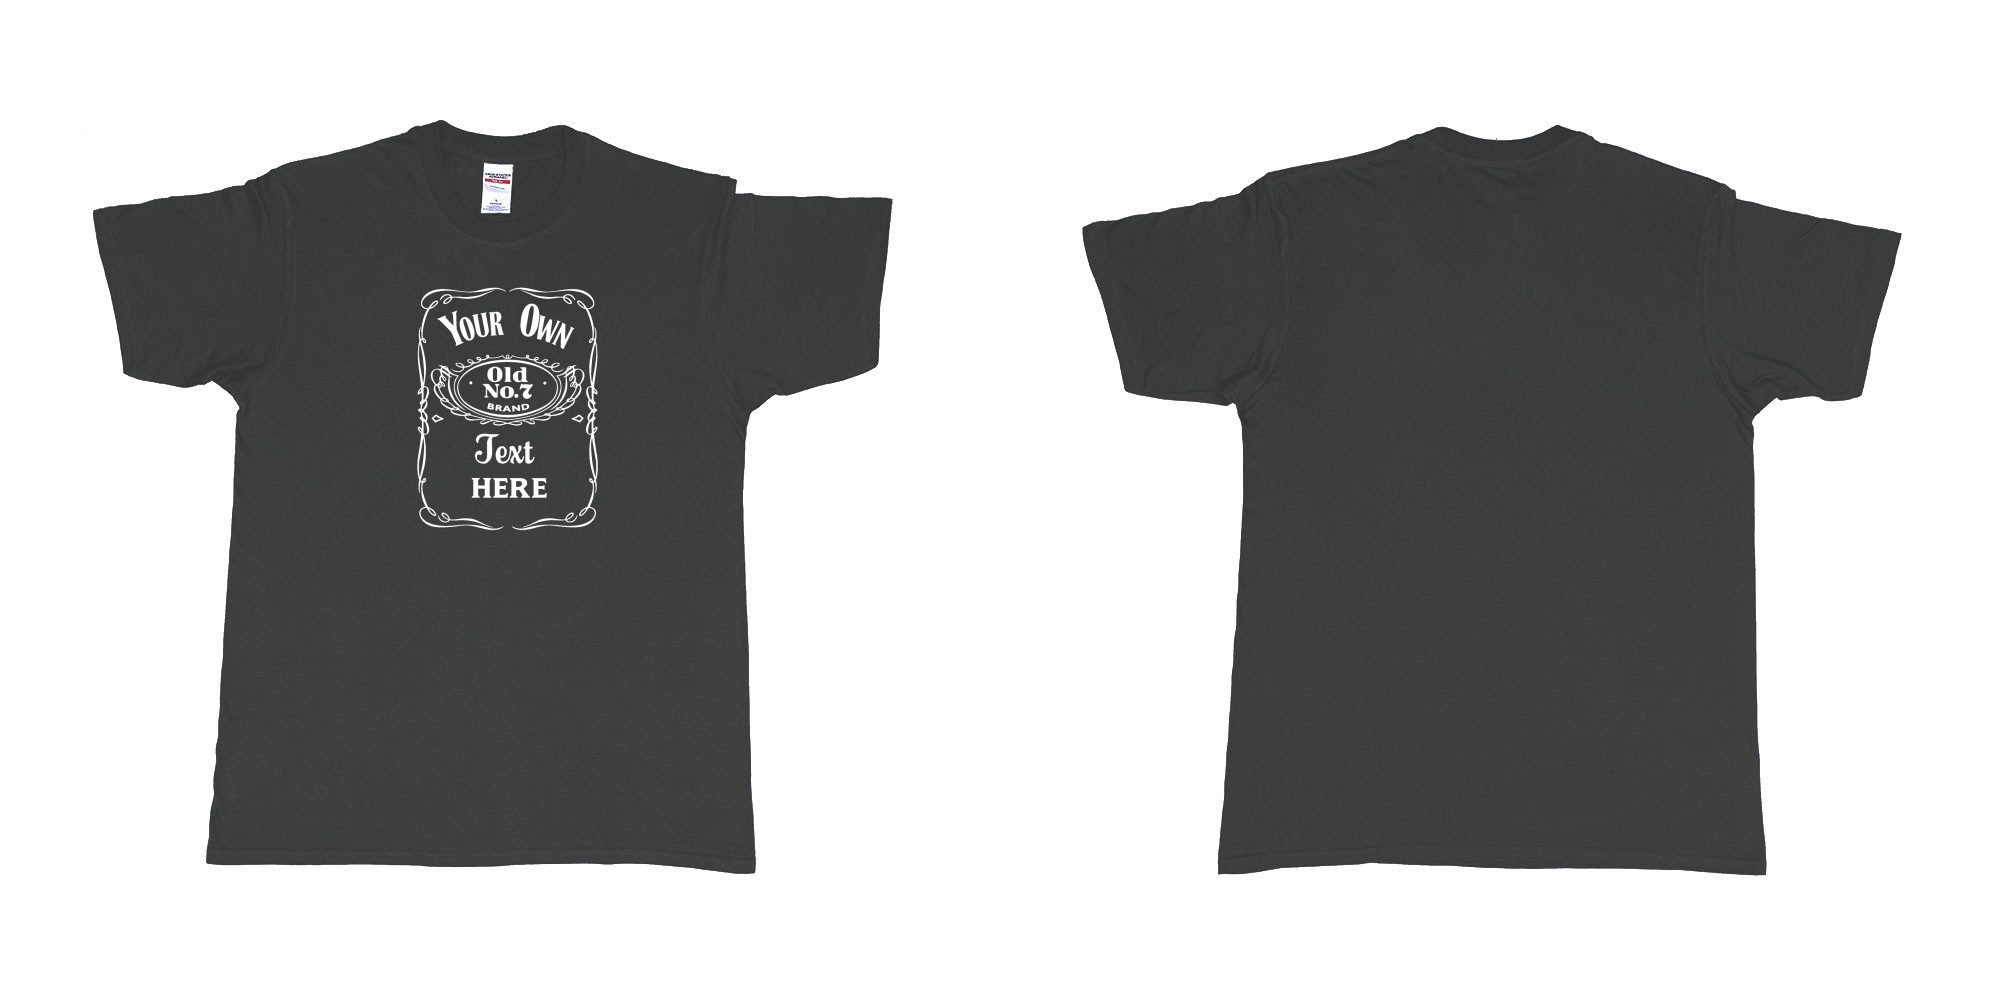 Custom tshirt design Jack Daniels Label in fabric color black choice your own text made in Bali by The Pirate Way